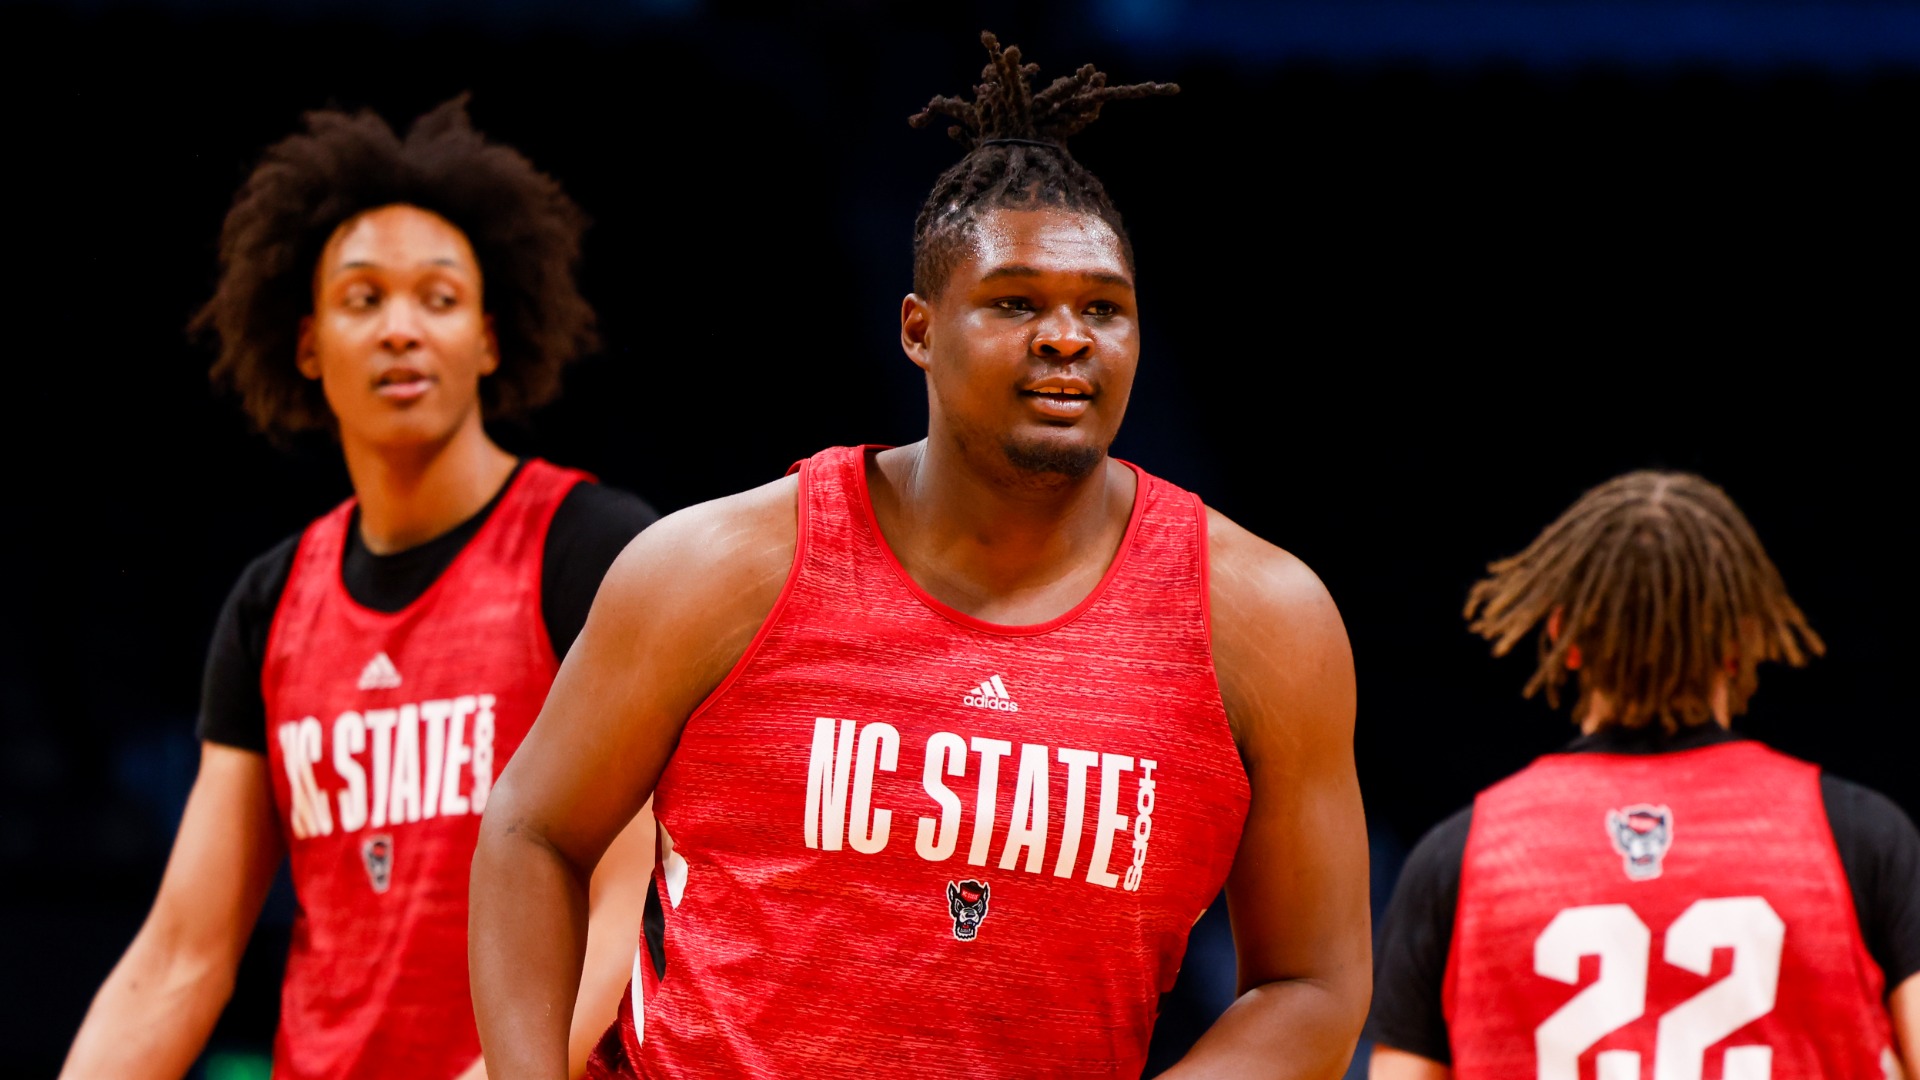 NCAA Tournament Star Reportedly Gaining Interest From NFL Evaluators [Video]